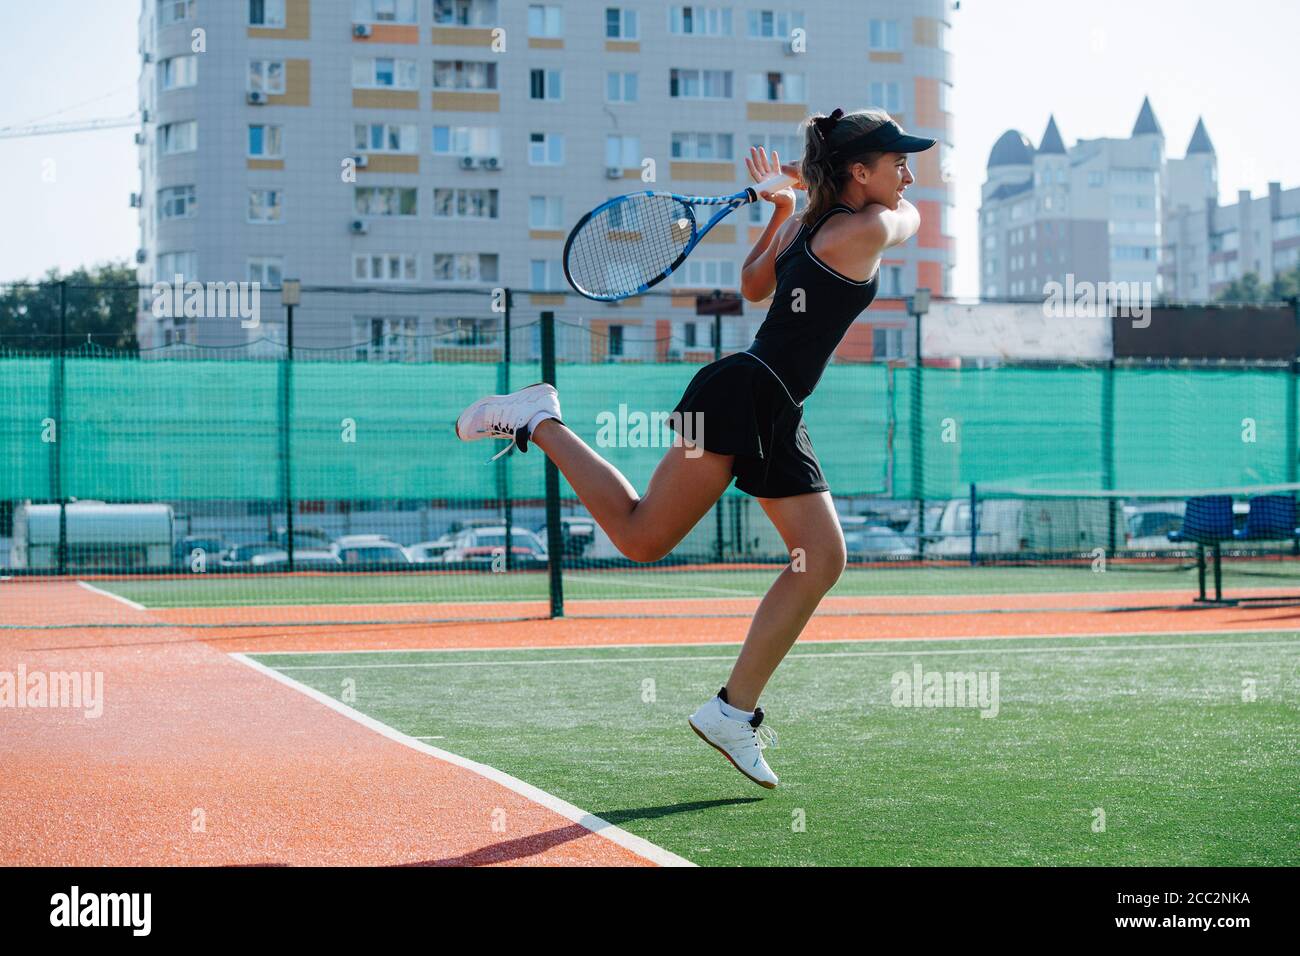 Young girl playing tennis on a new court, jumping while striking ball Stock Photo